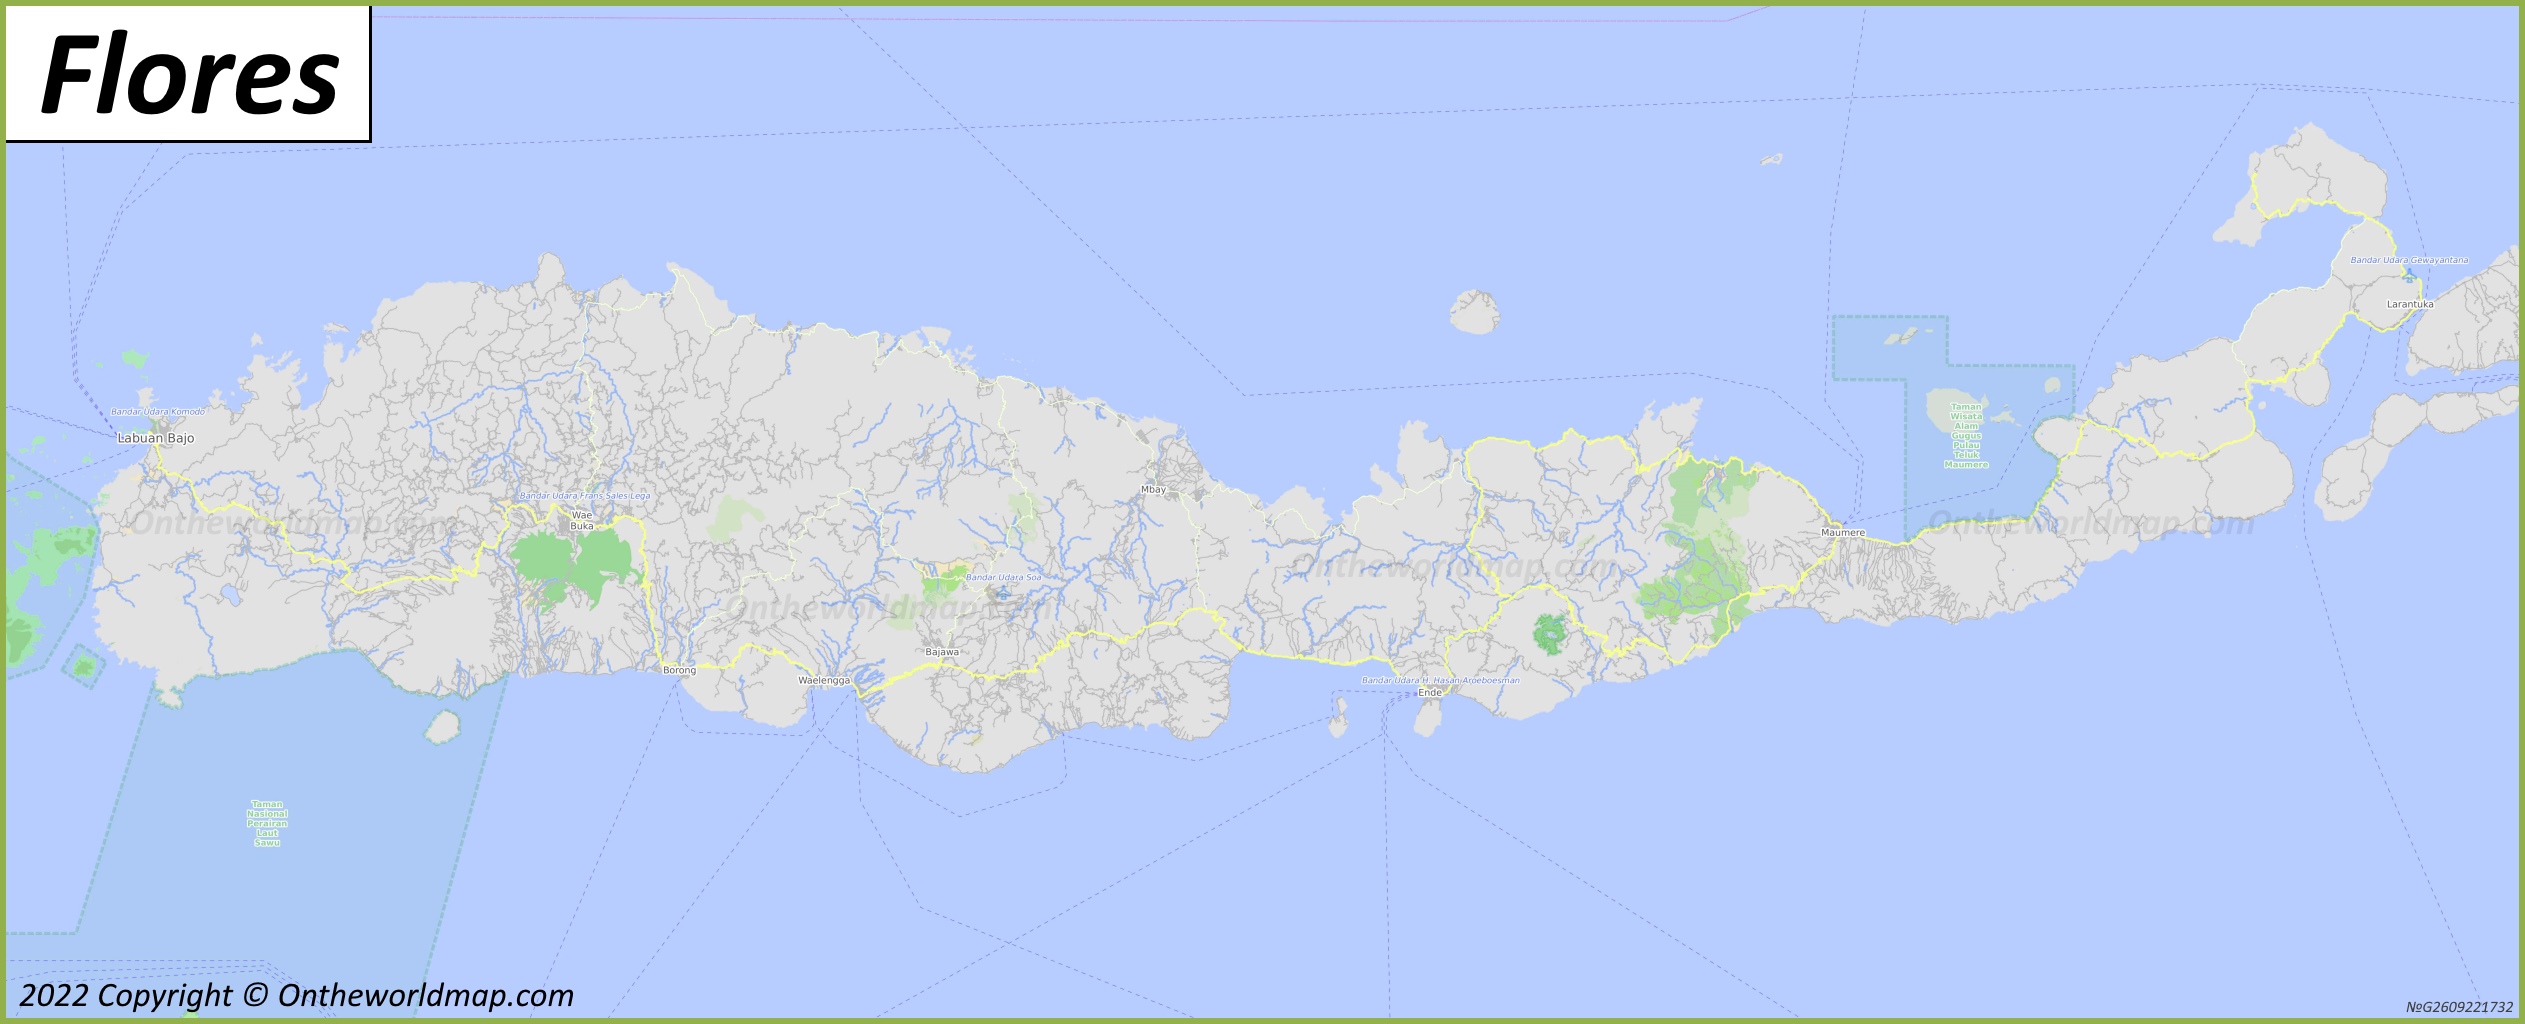 Map of Flores Island